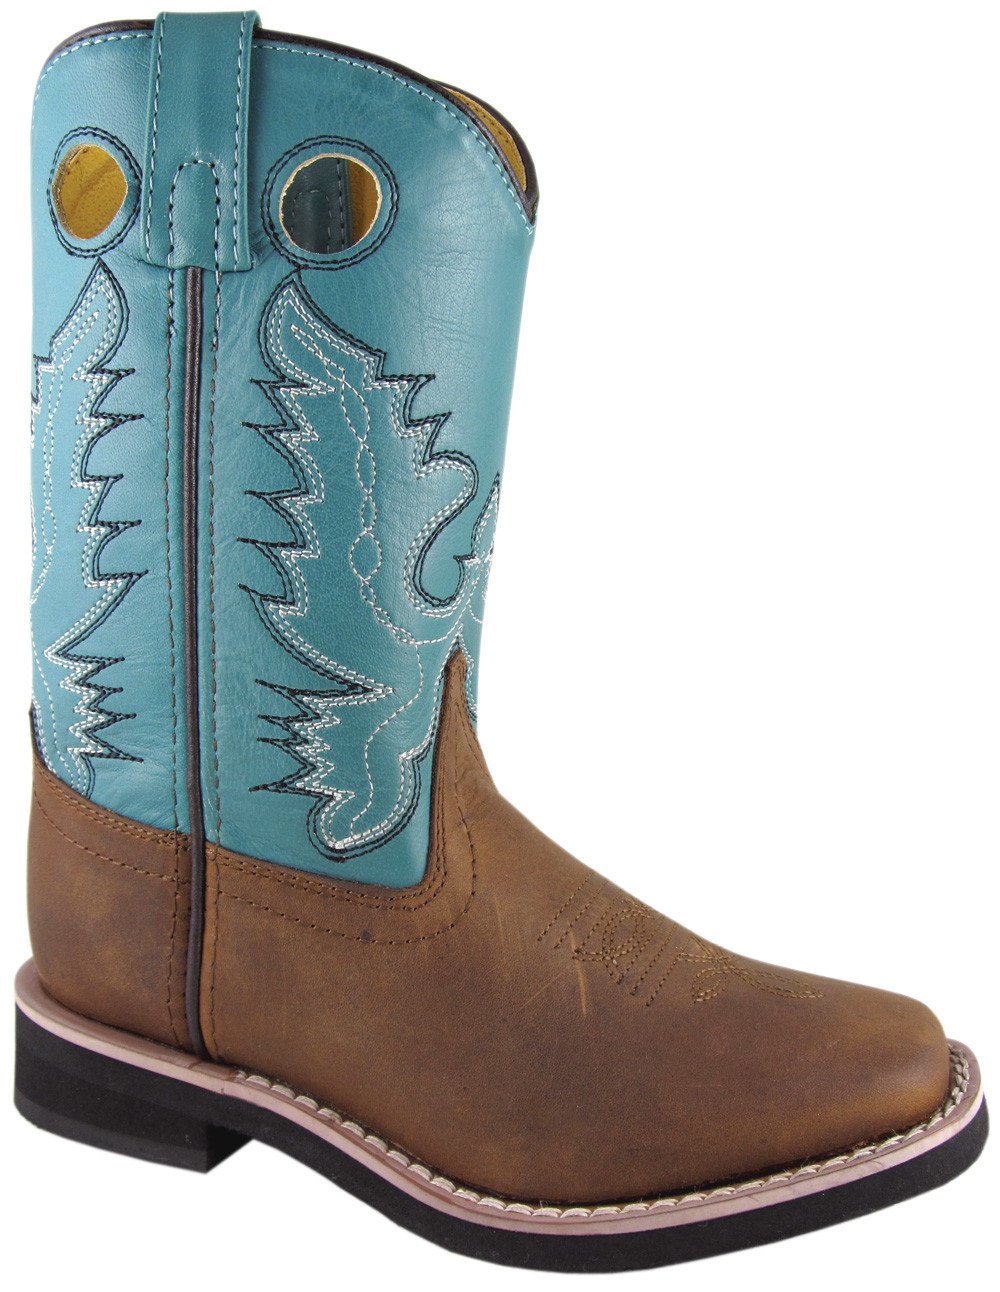 Children's Smoky Mountain Pueblo Leather Boot in Brown Oil Distress/Turquoise